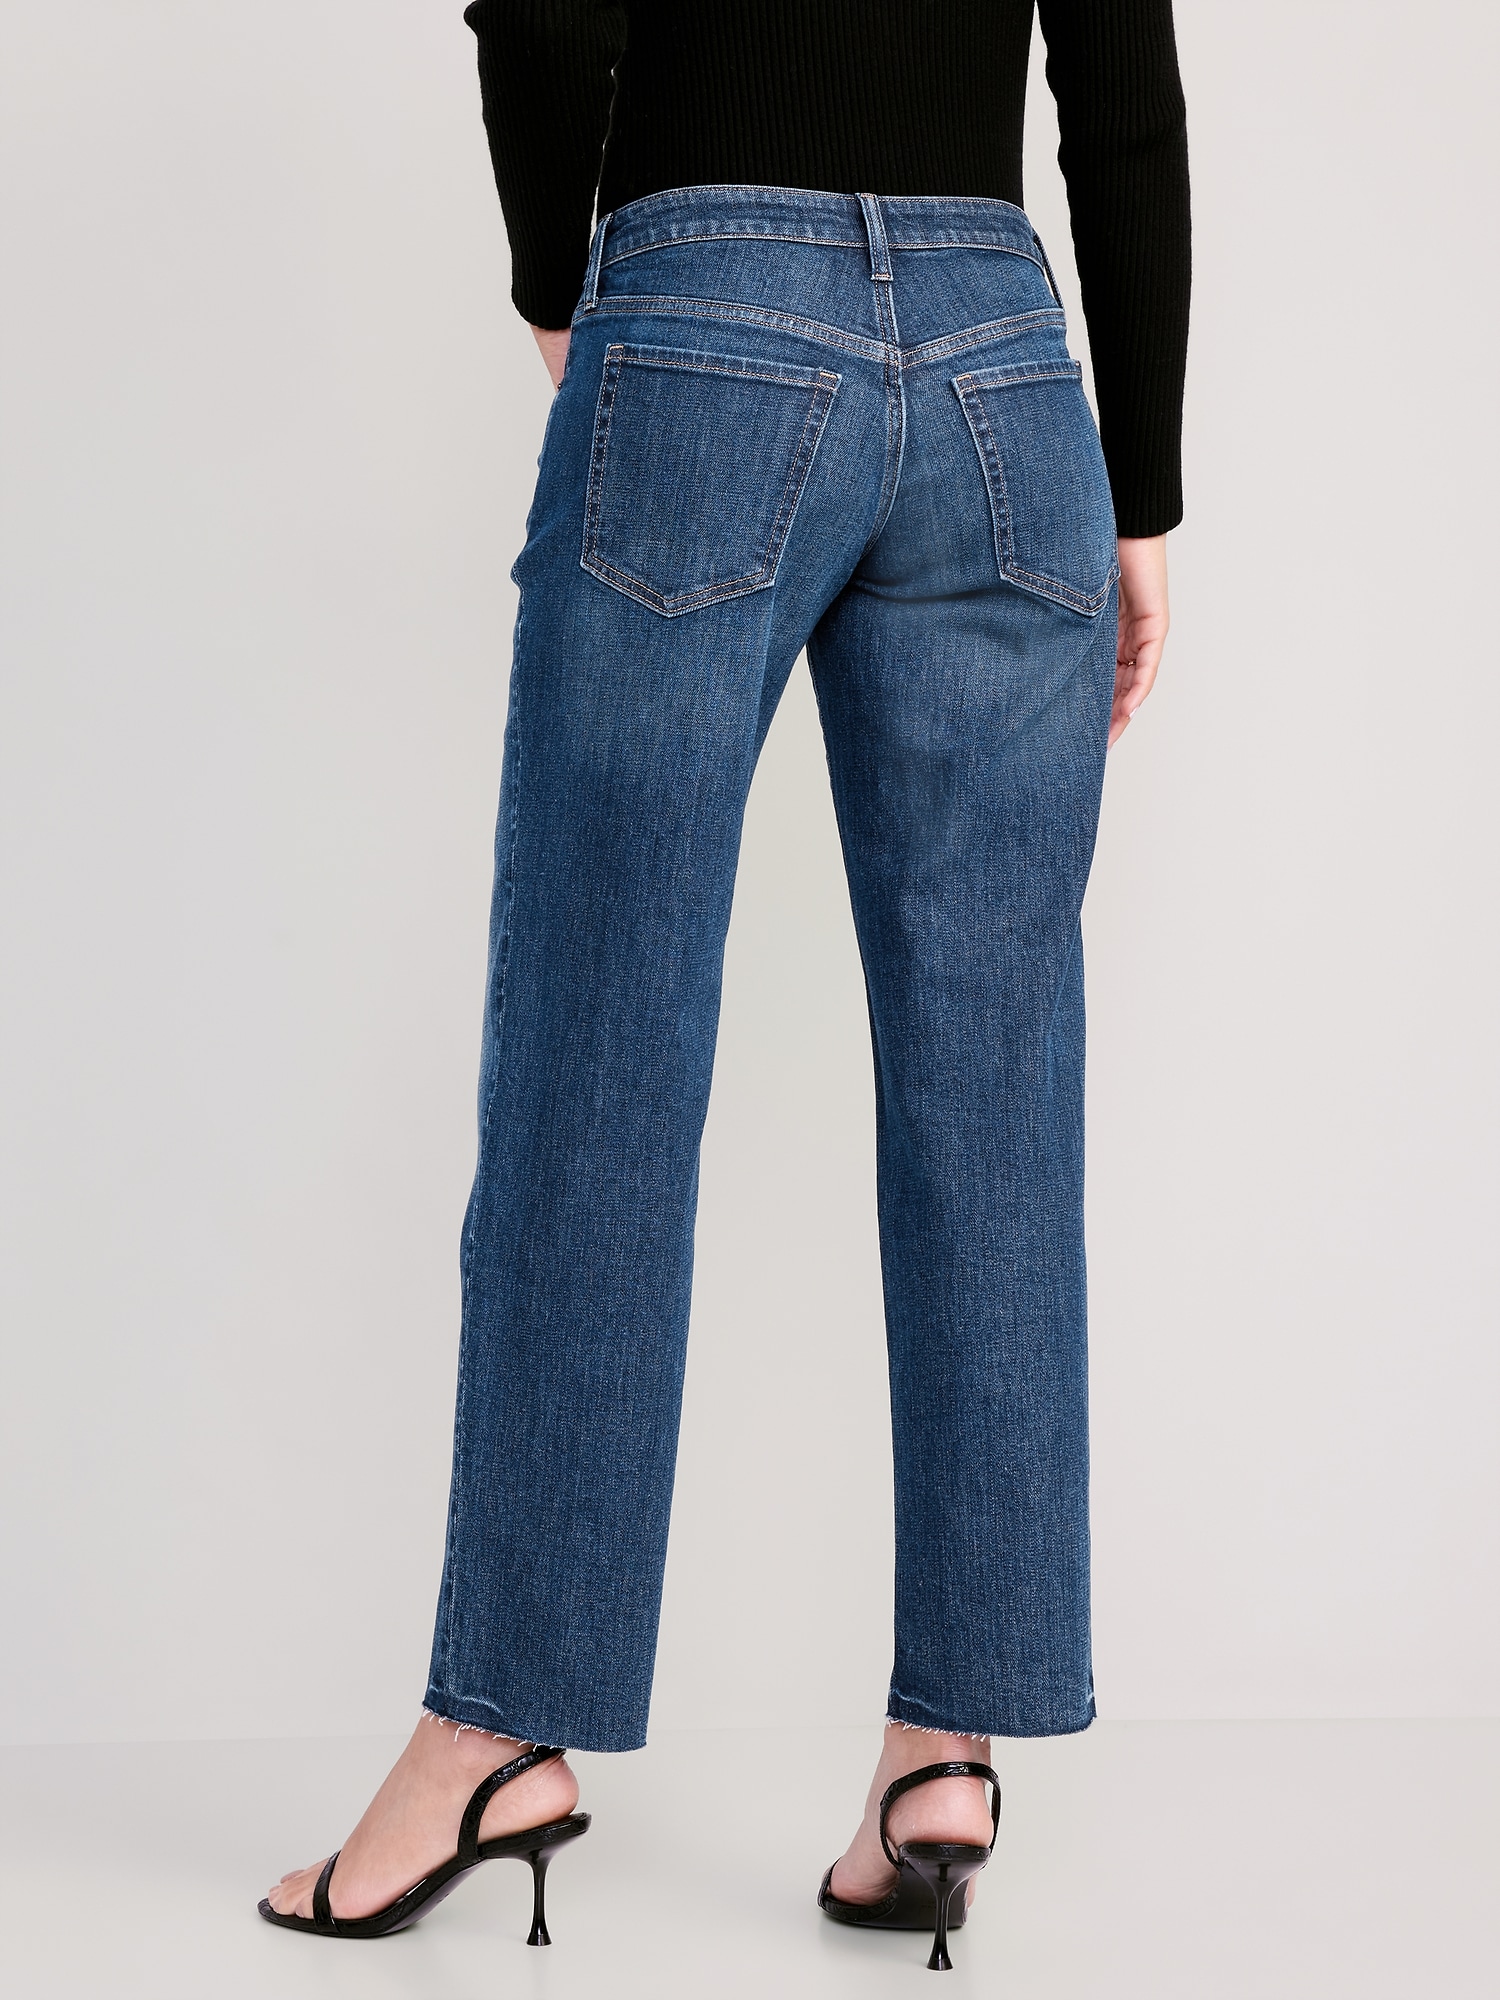 Low-Rise OG Loose Cut-Off Jeans for Women | Old Navy